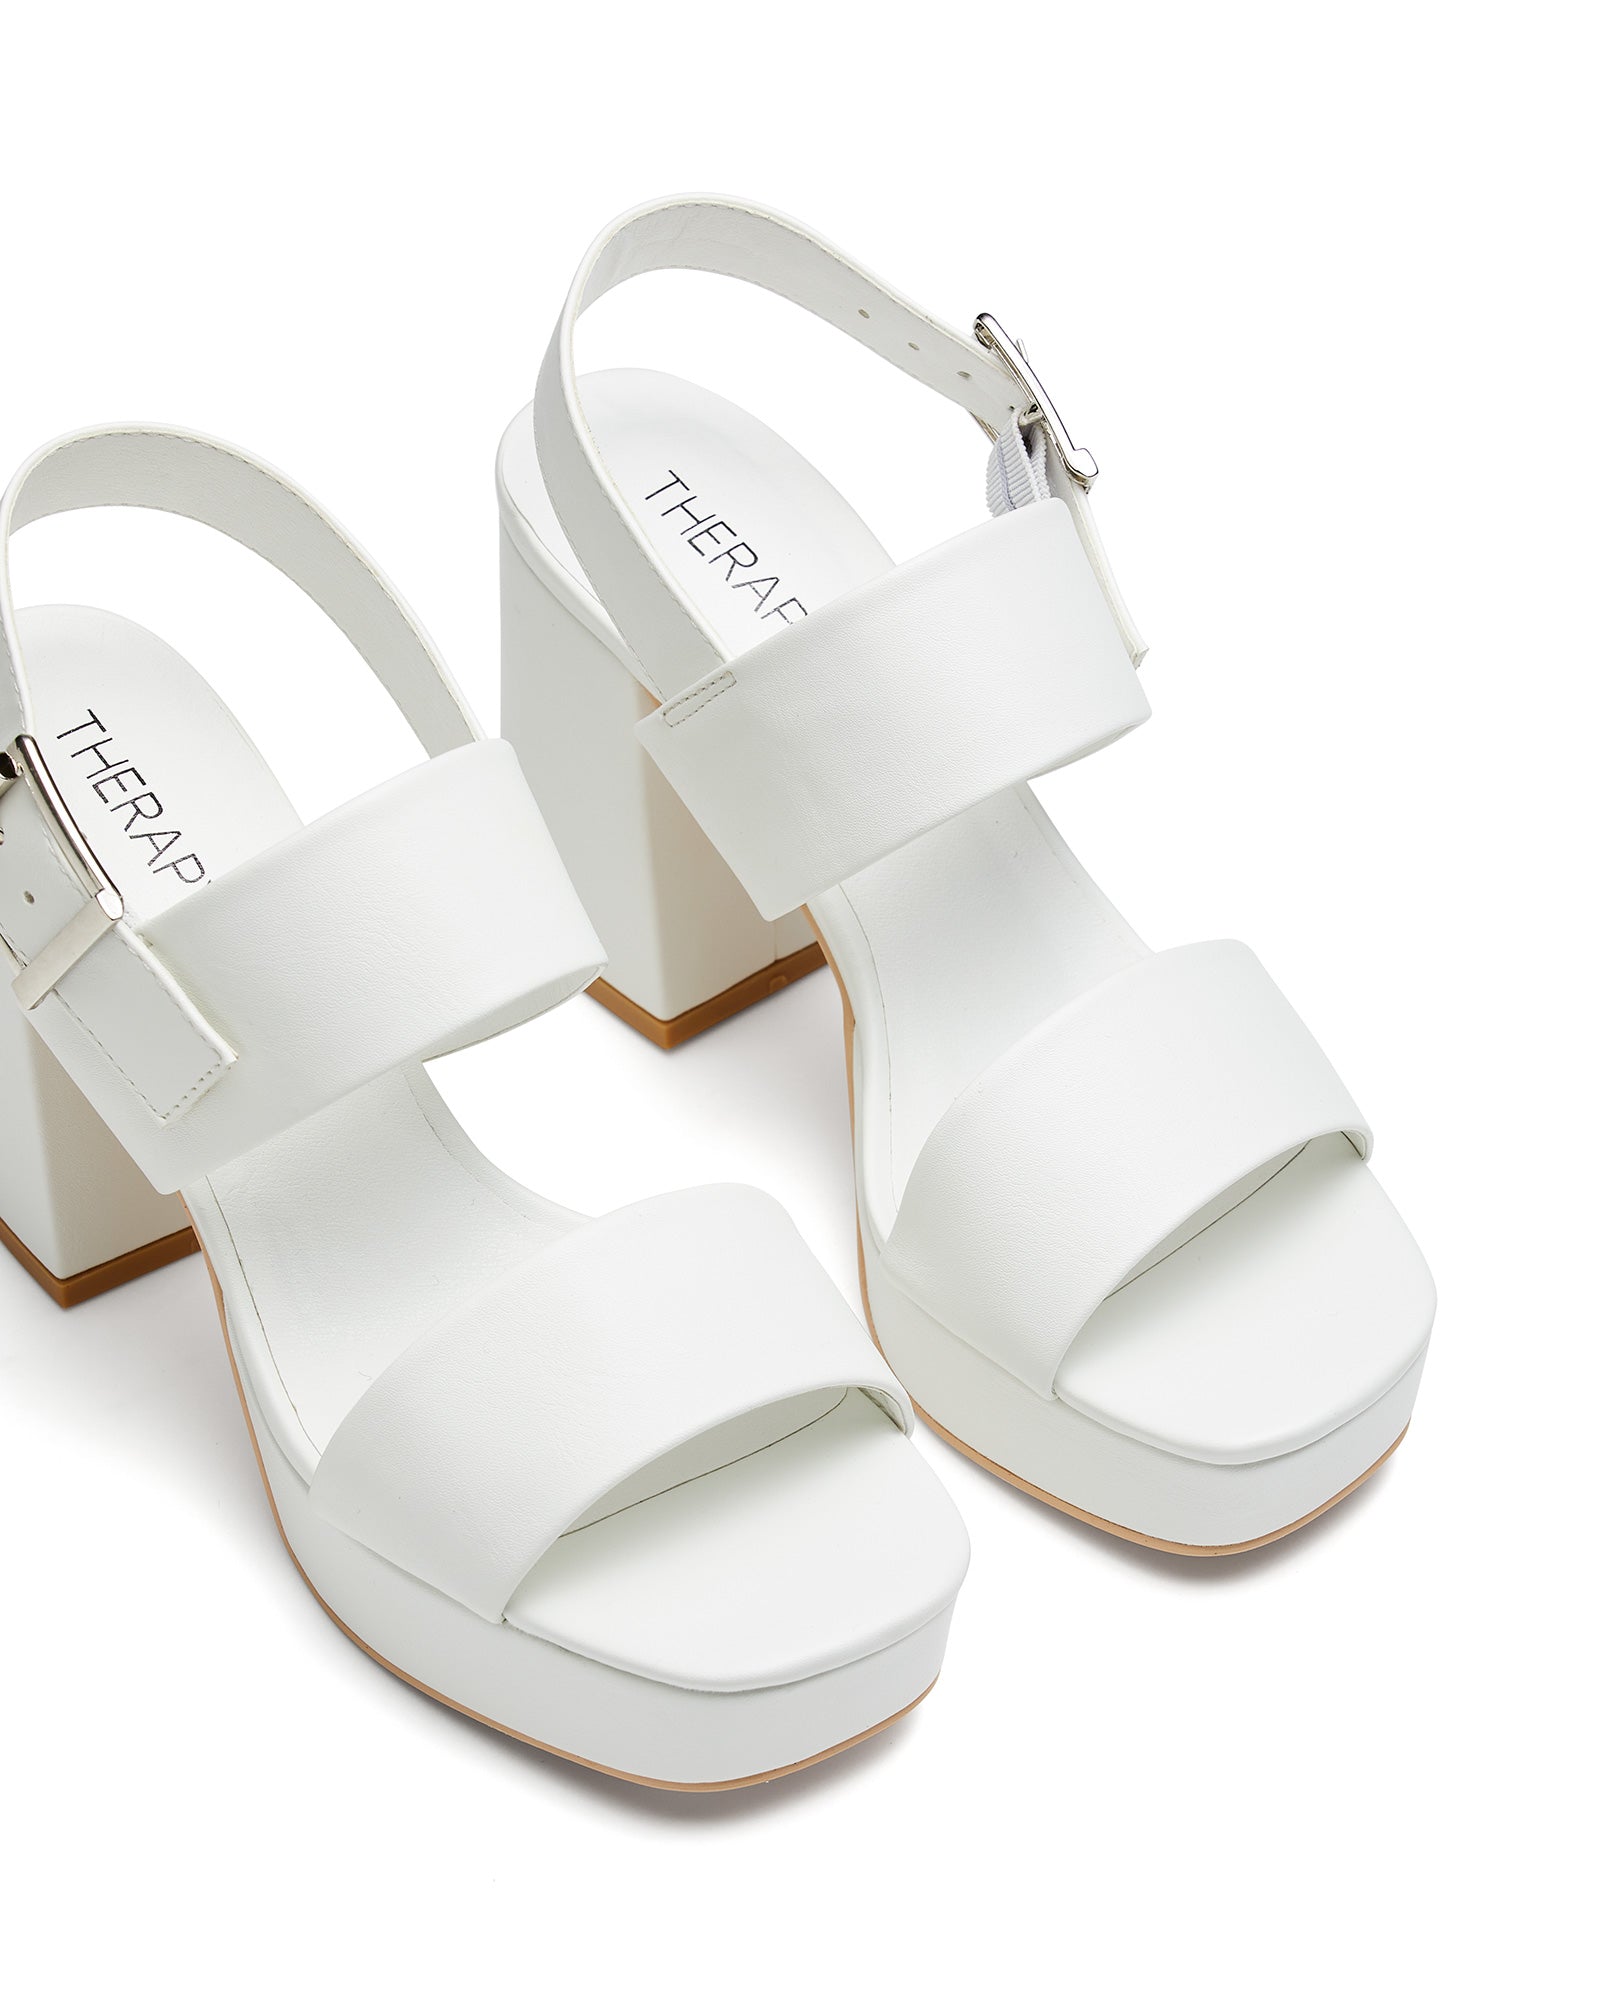 Therapy Shoes Austin White | Women's Heels | Sandals | Platform | Chunky